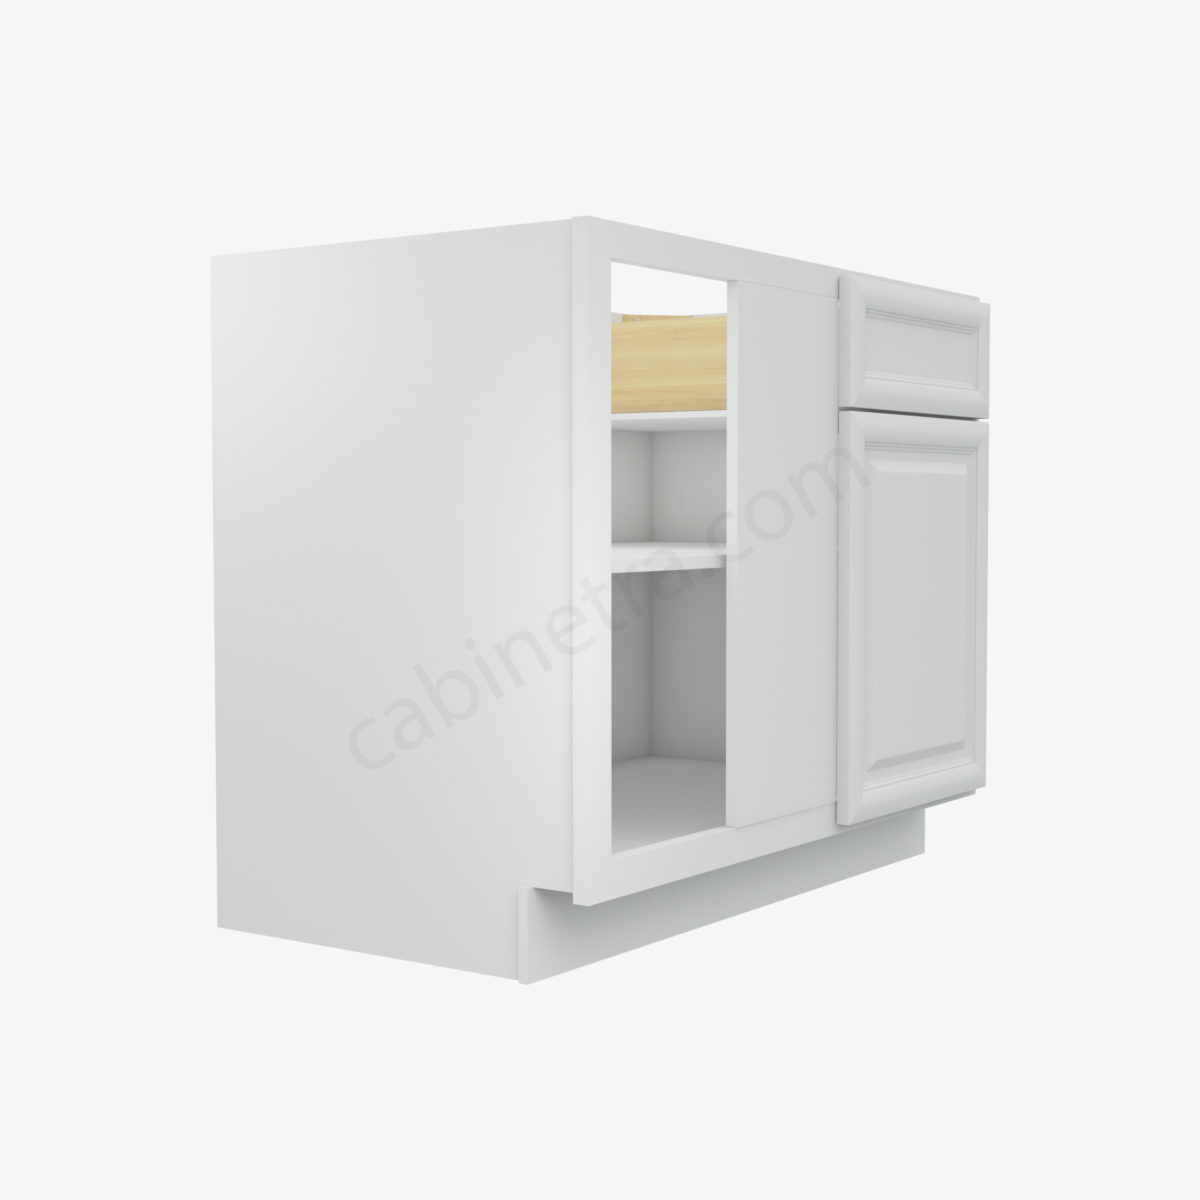 KW BBLC42 45 39W 4  Forevermark K White Cabinetra scaled